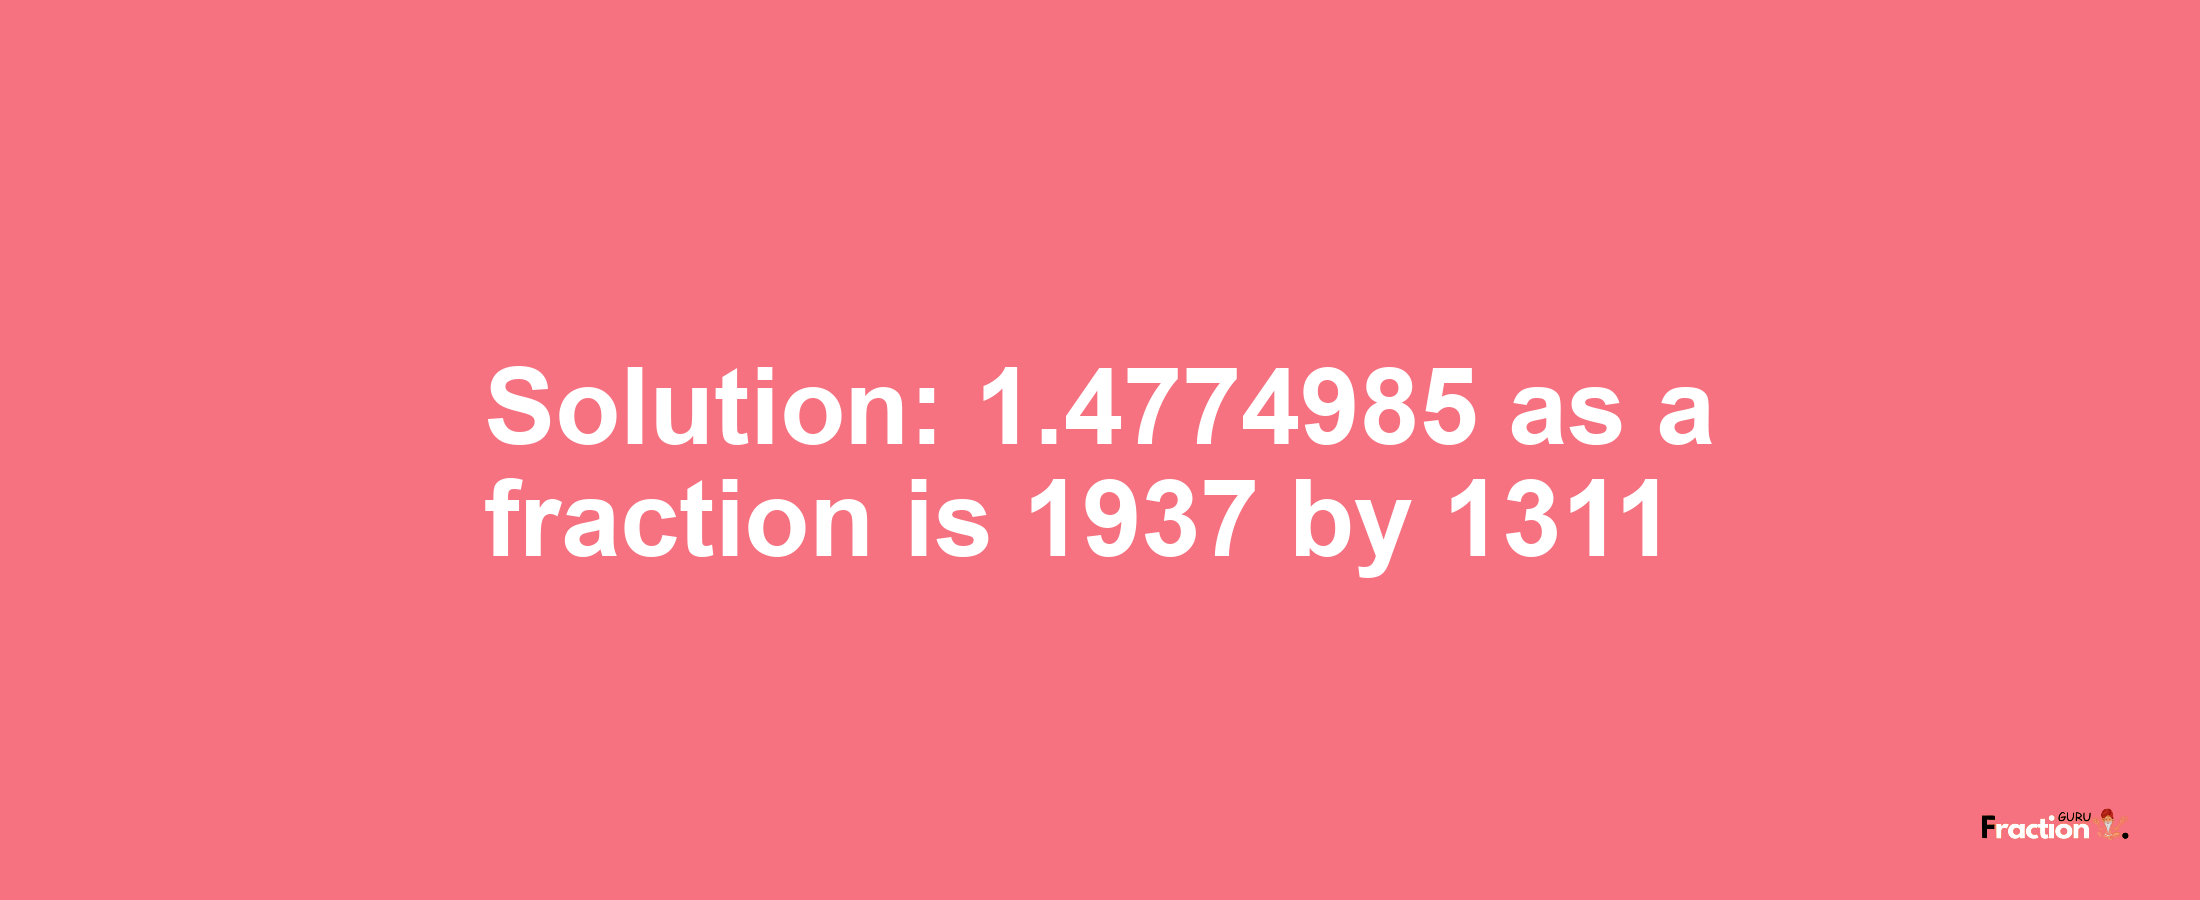 Solution:1.4774985 as a fraction is 1937/1311